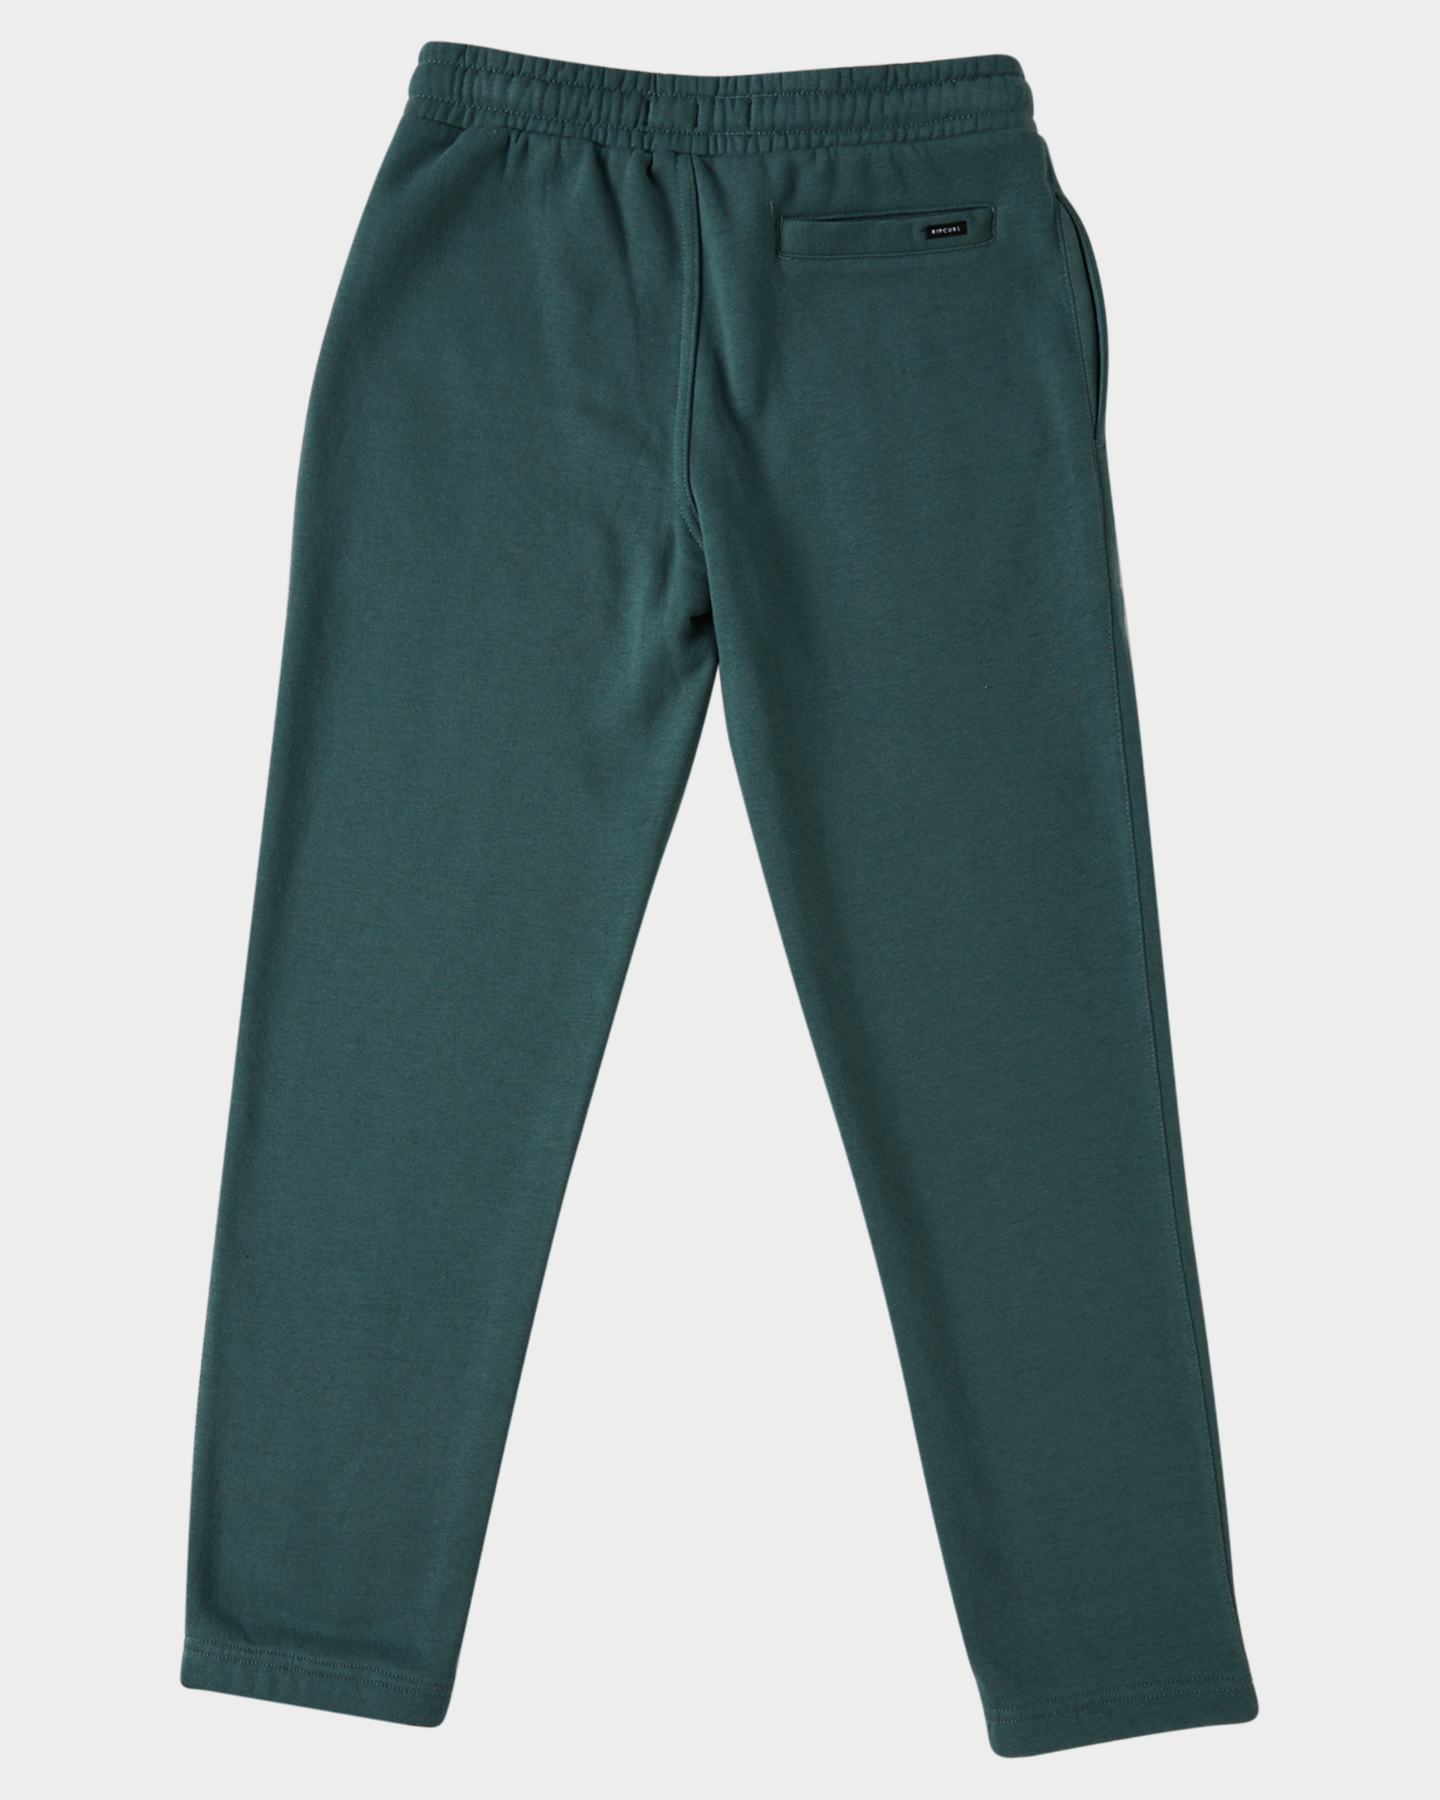 Rip Curl Boys Search Icon Track Pant - Teens - Muted Green | SurfStitch